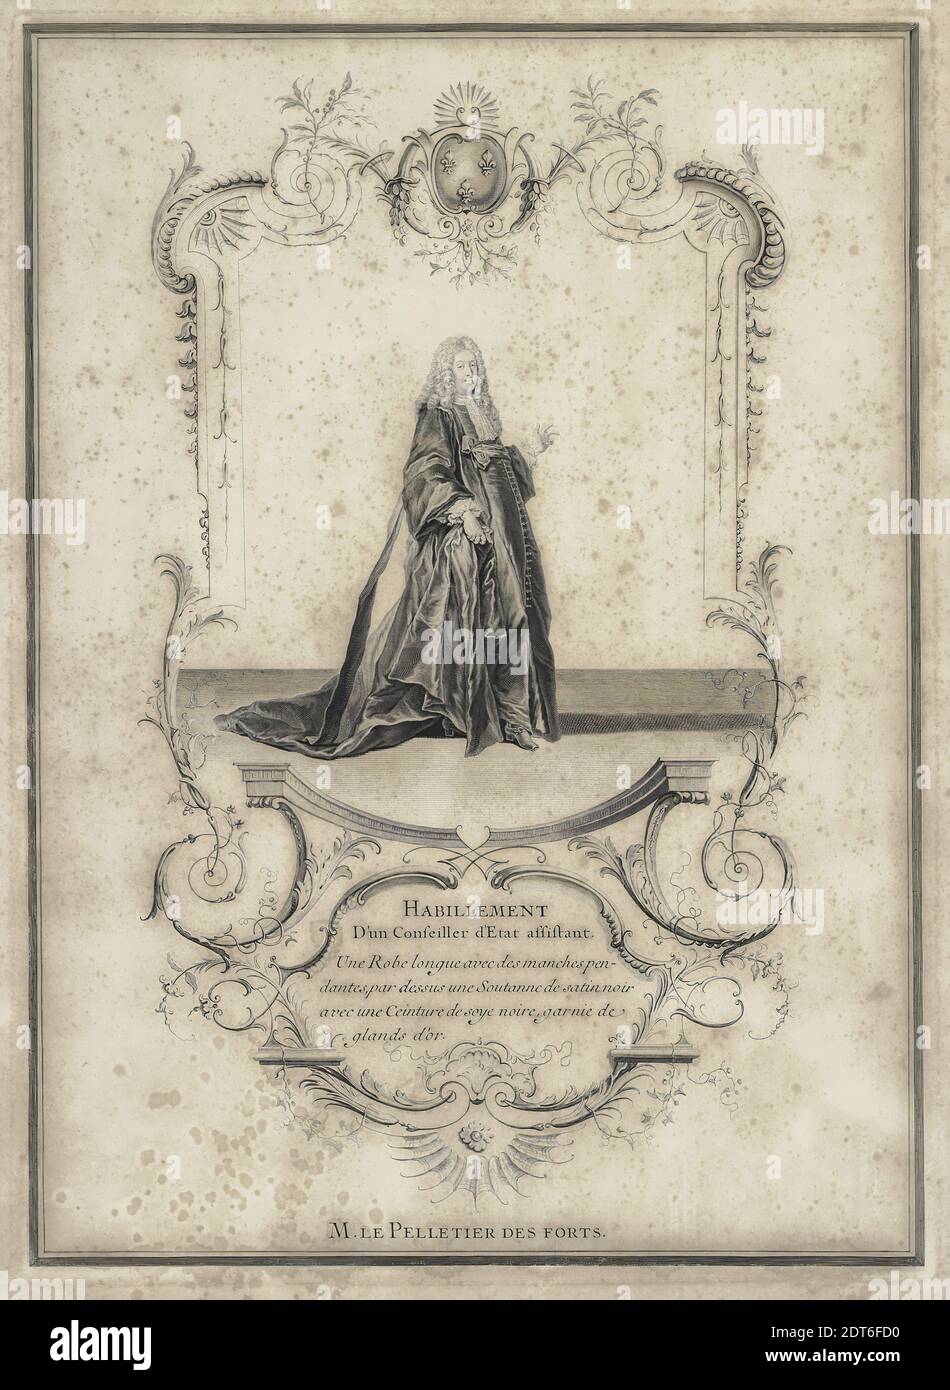 Engraver: Unknown, Design for Robe of Councellor of State / M. le Pelletier  des Forts, Engraving, 20 1/4 × 14 1/2 in. (51.4 × 36.8 cm), Made in France,  French, 18th century, Works on Paper - Prints Stock Photo - Alamy